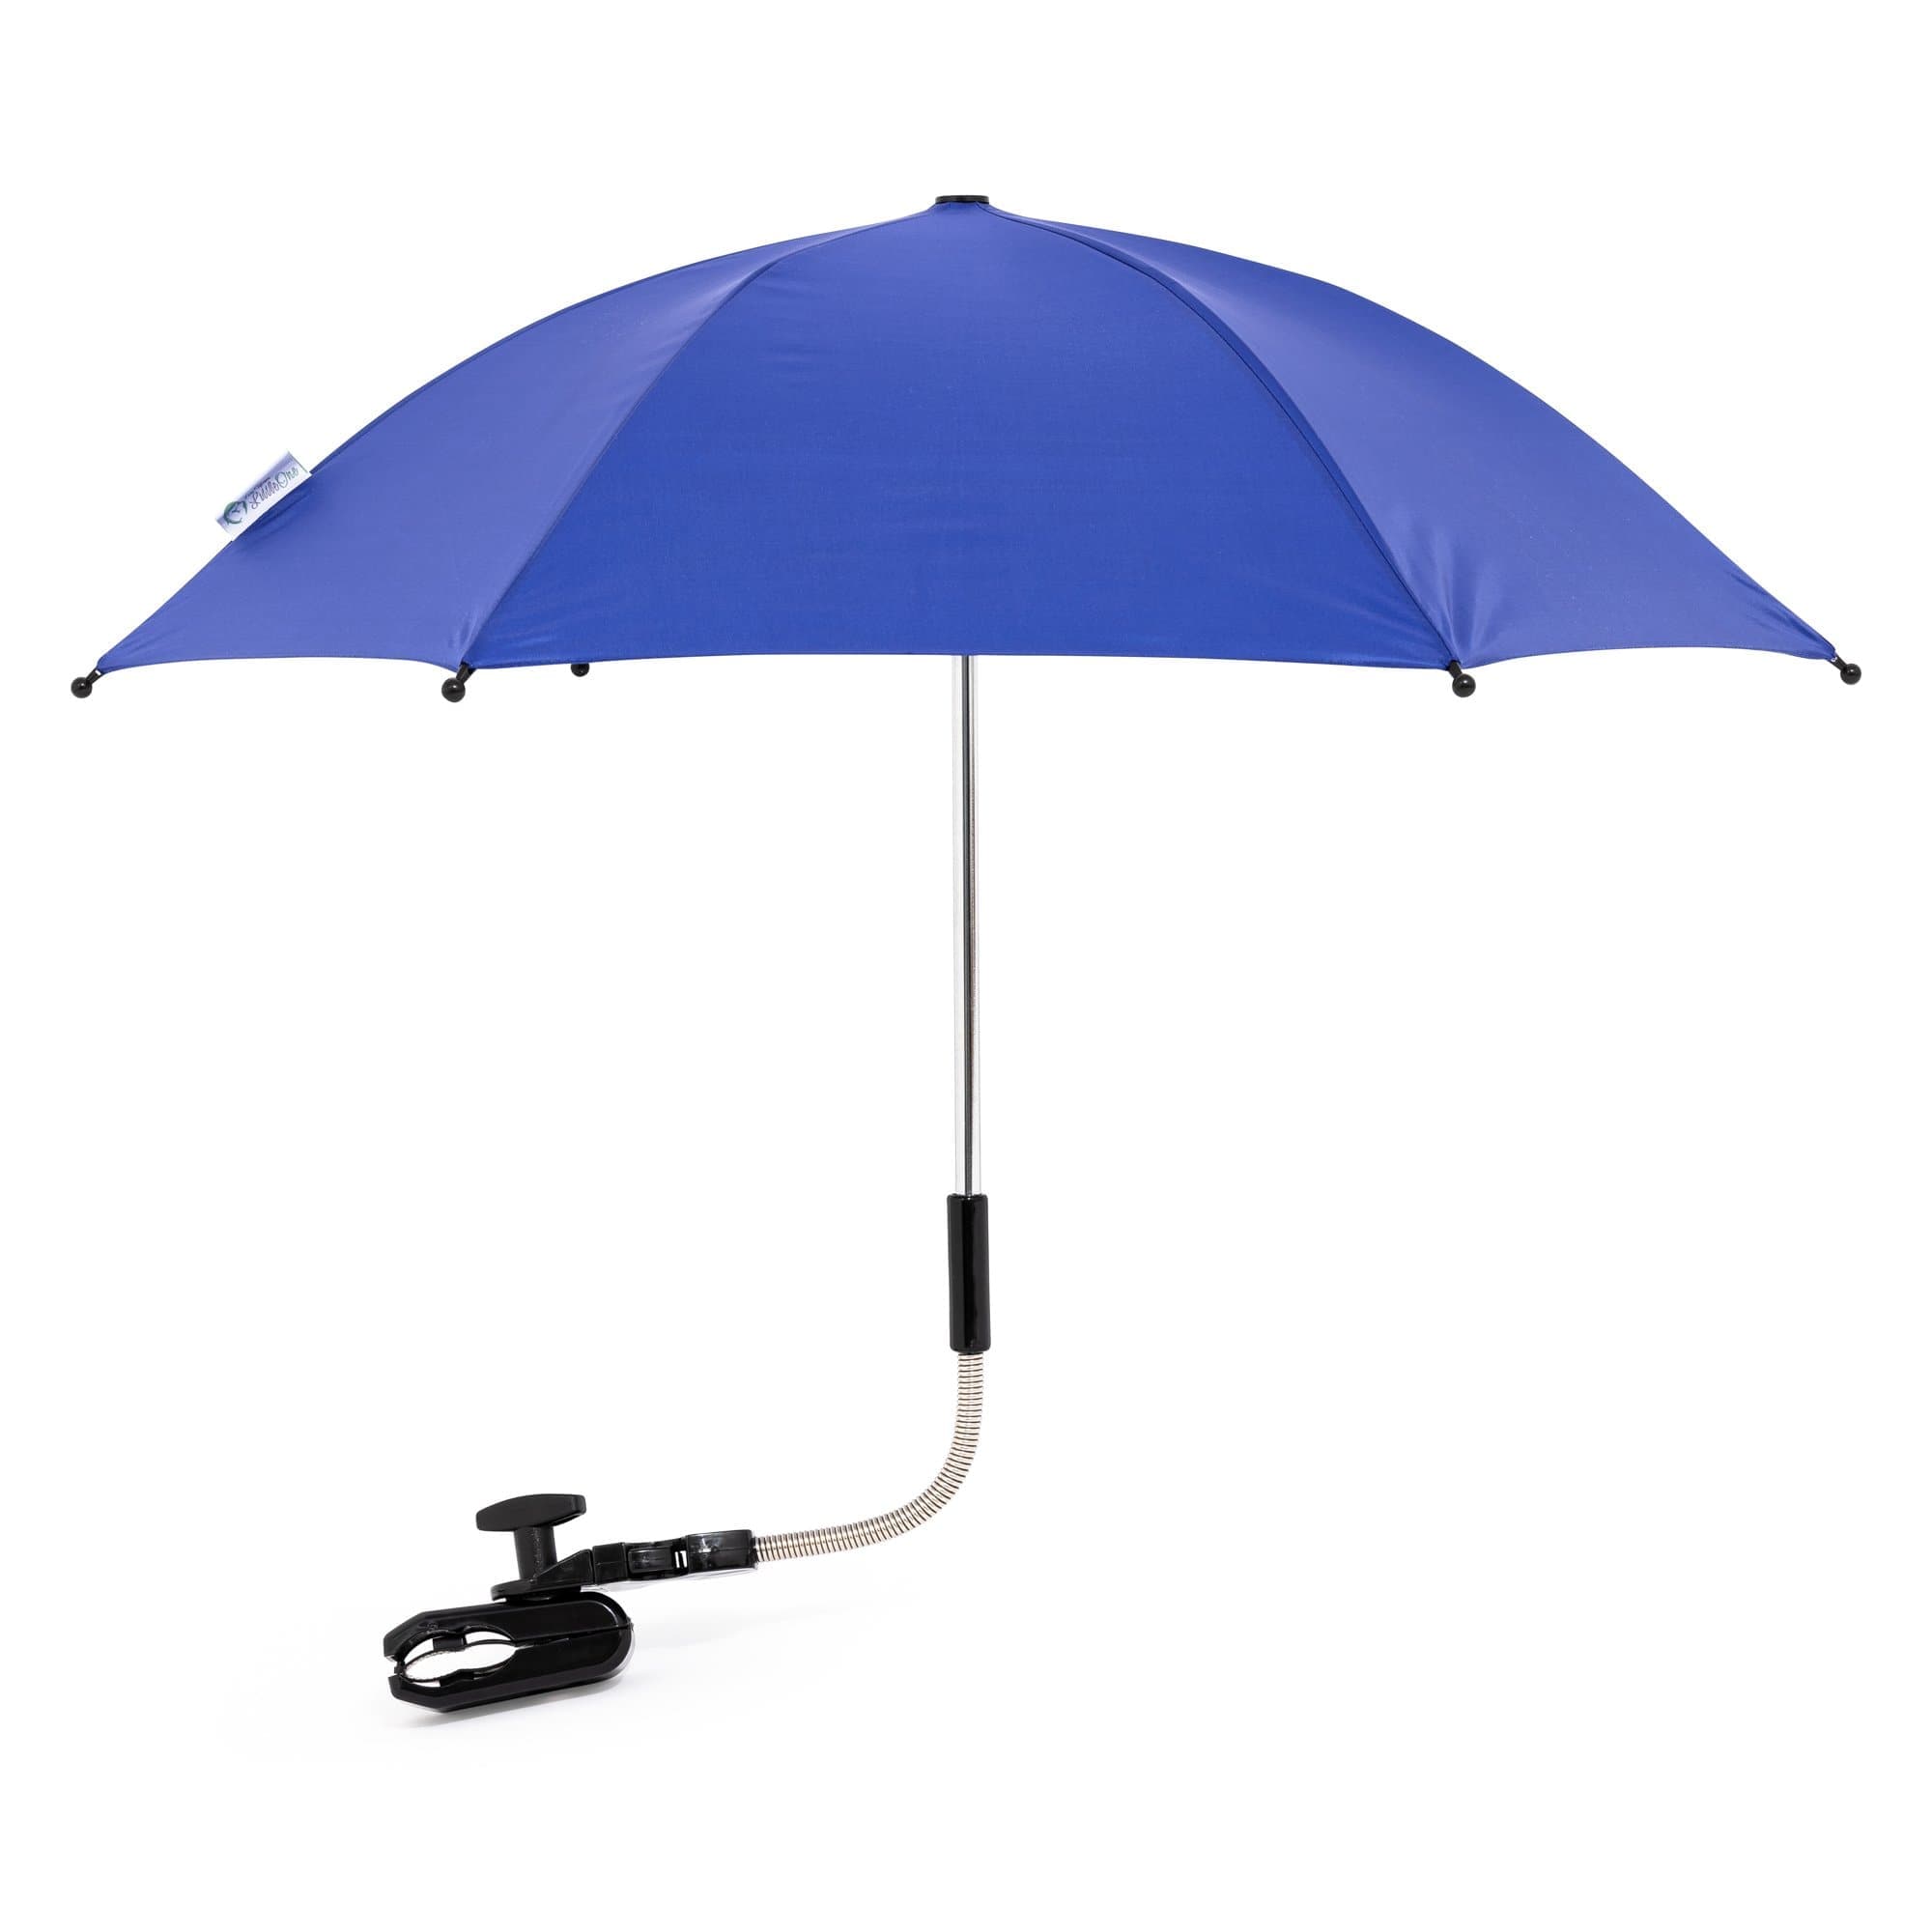 Universal Baby Parasol - Fits All Pushchairs / Prams / Strollers And Buggies - Fits All Models - For Your Little One